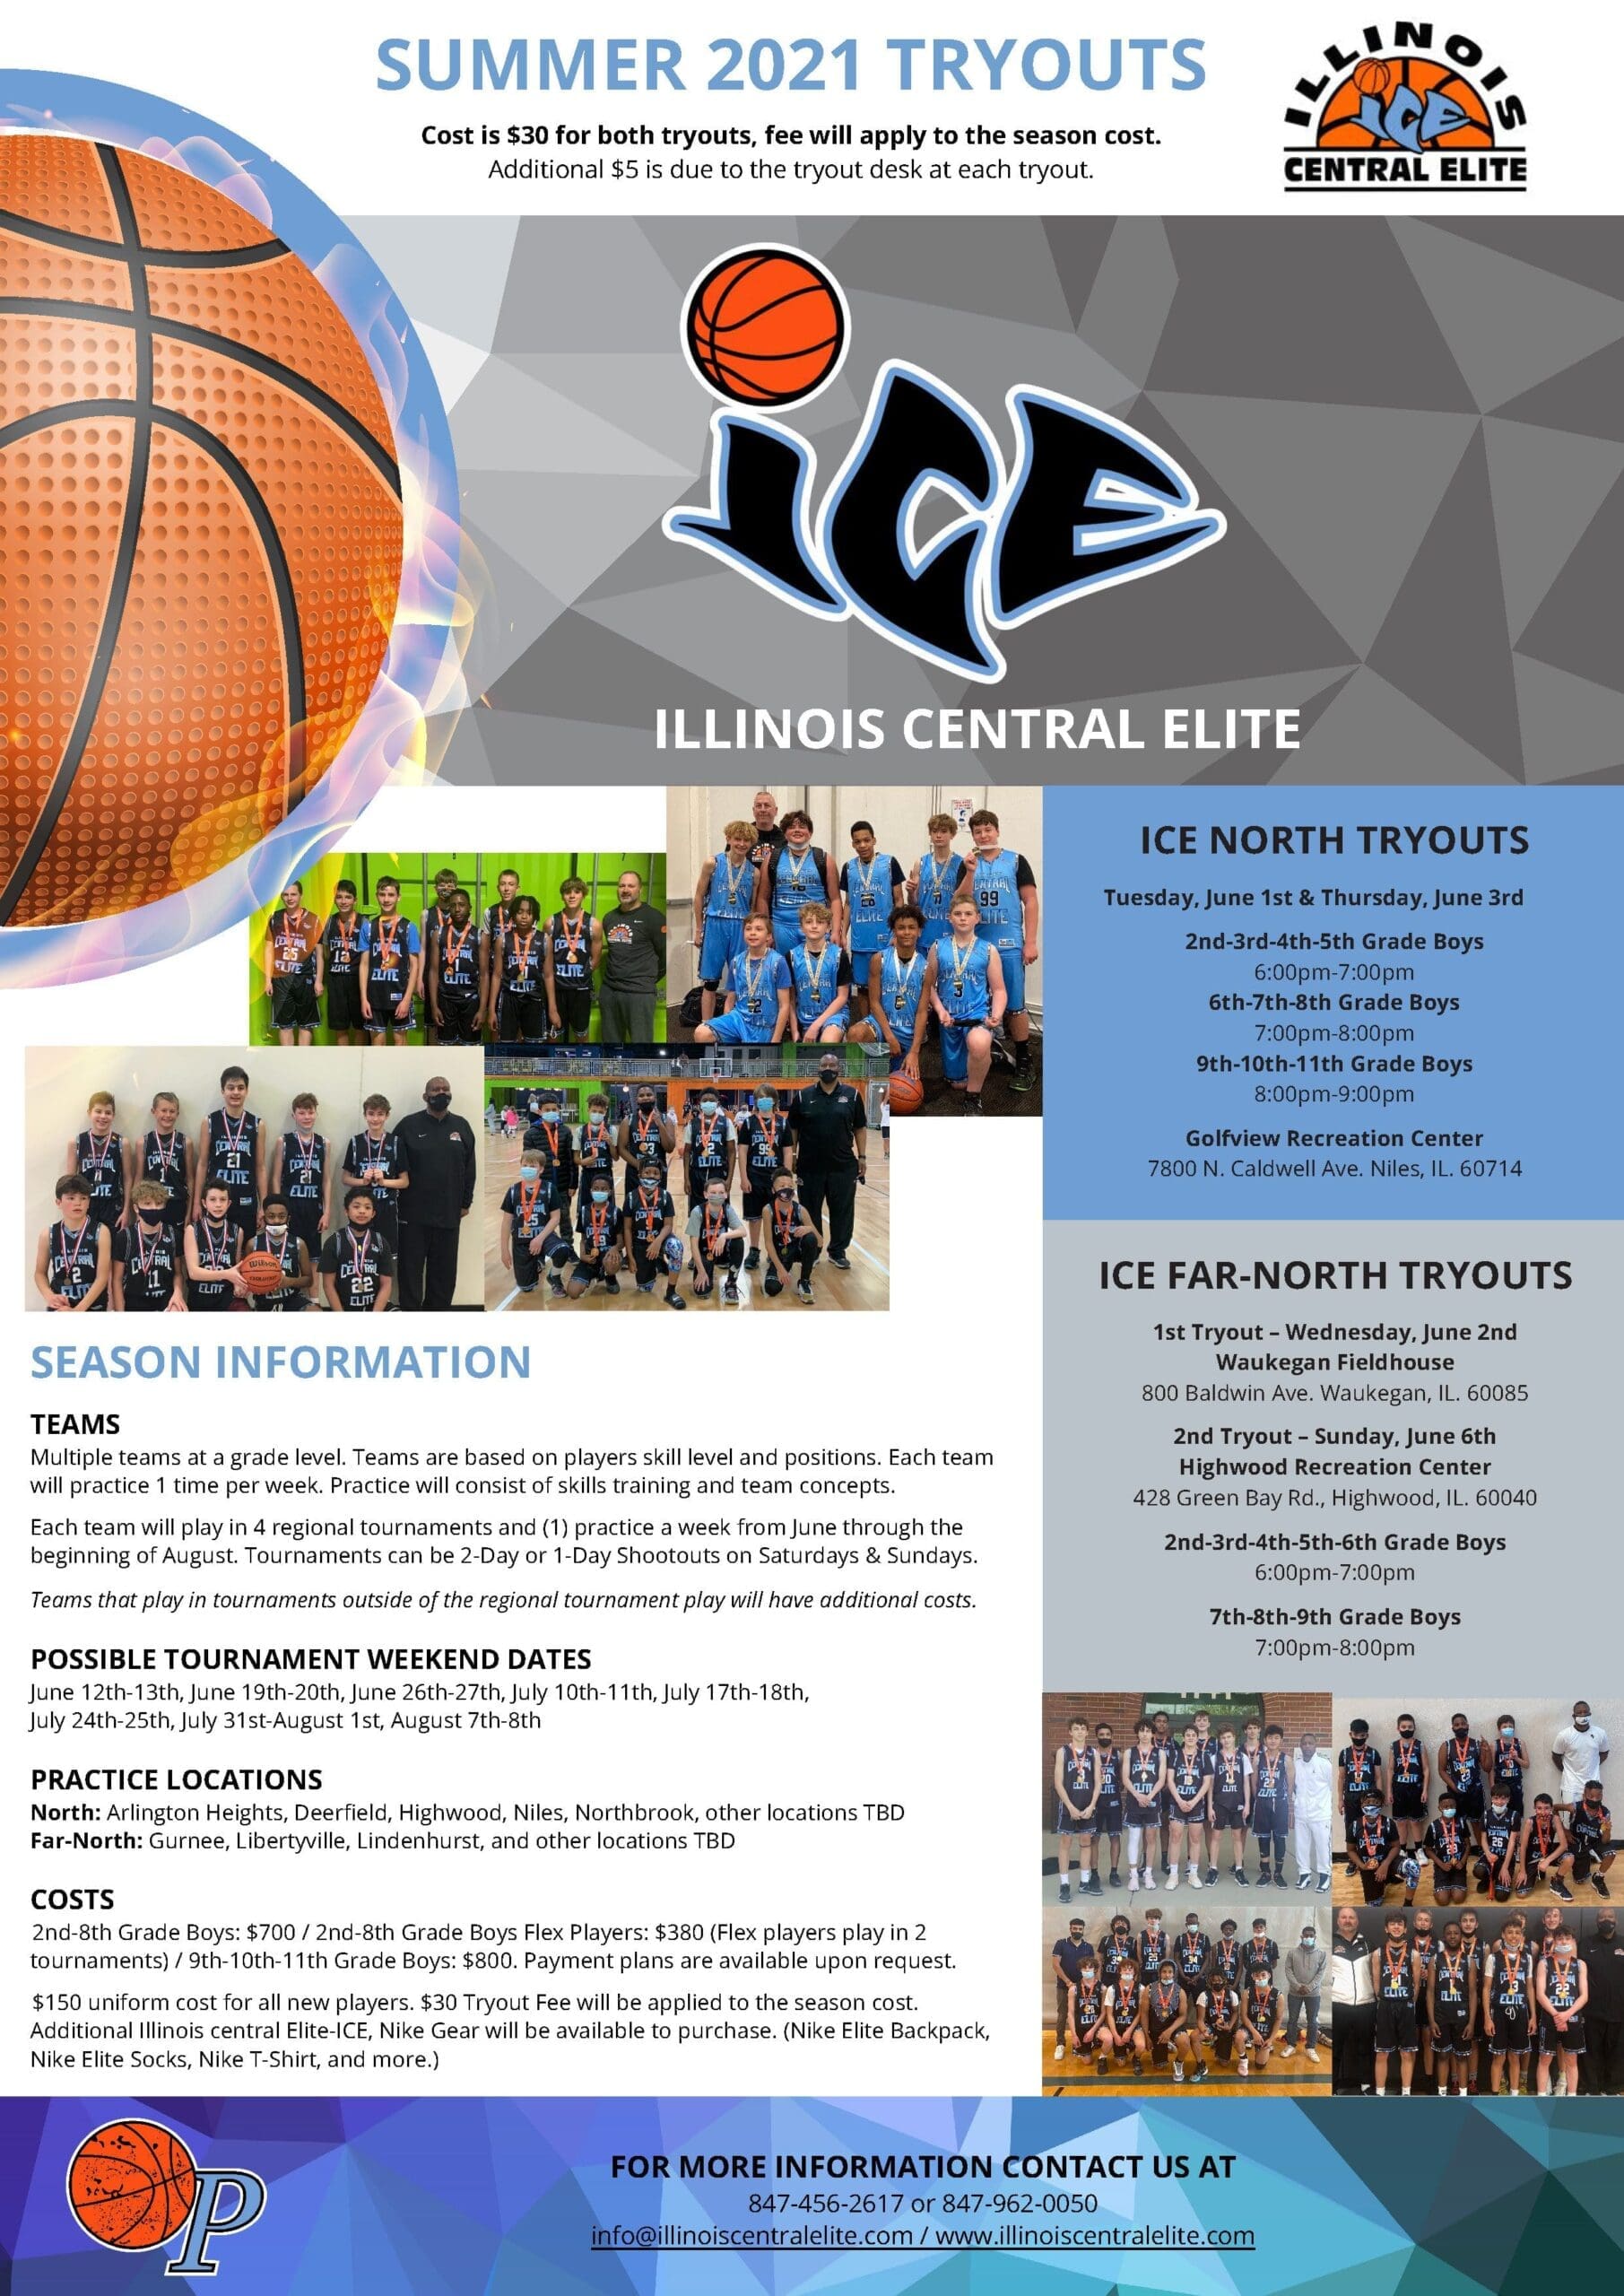 2021 Summer Tryouts